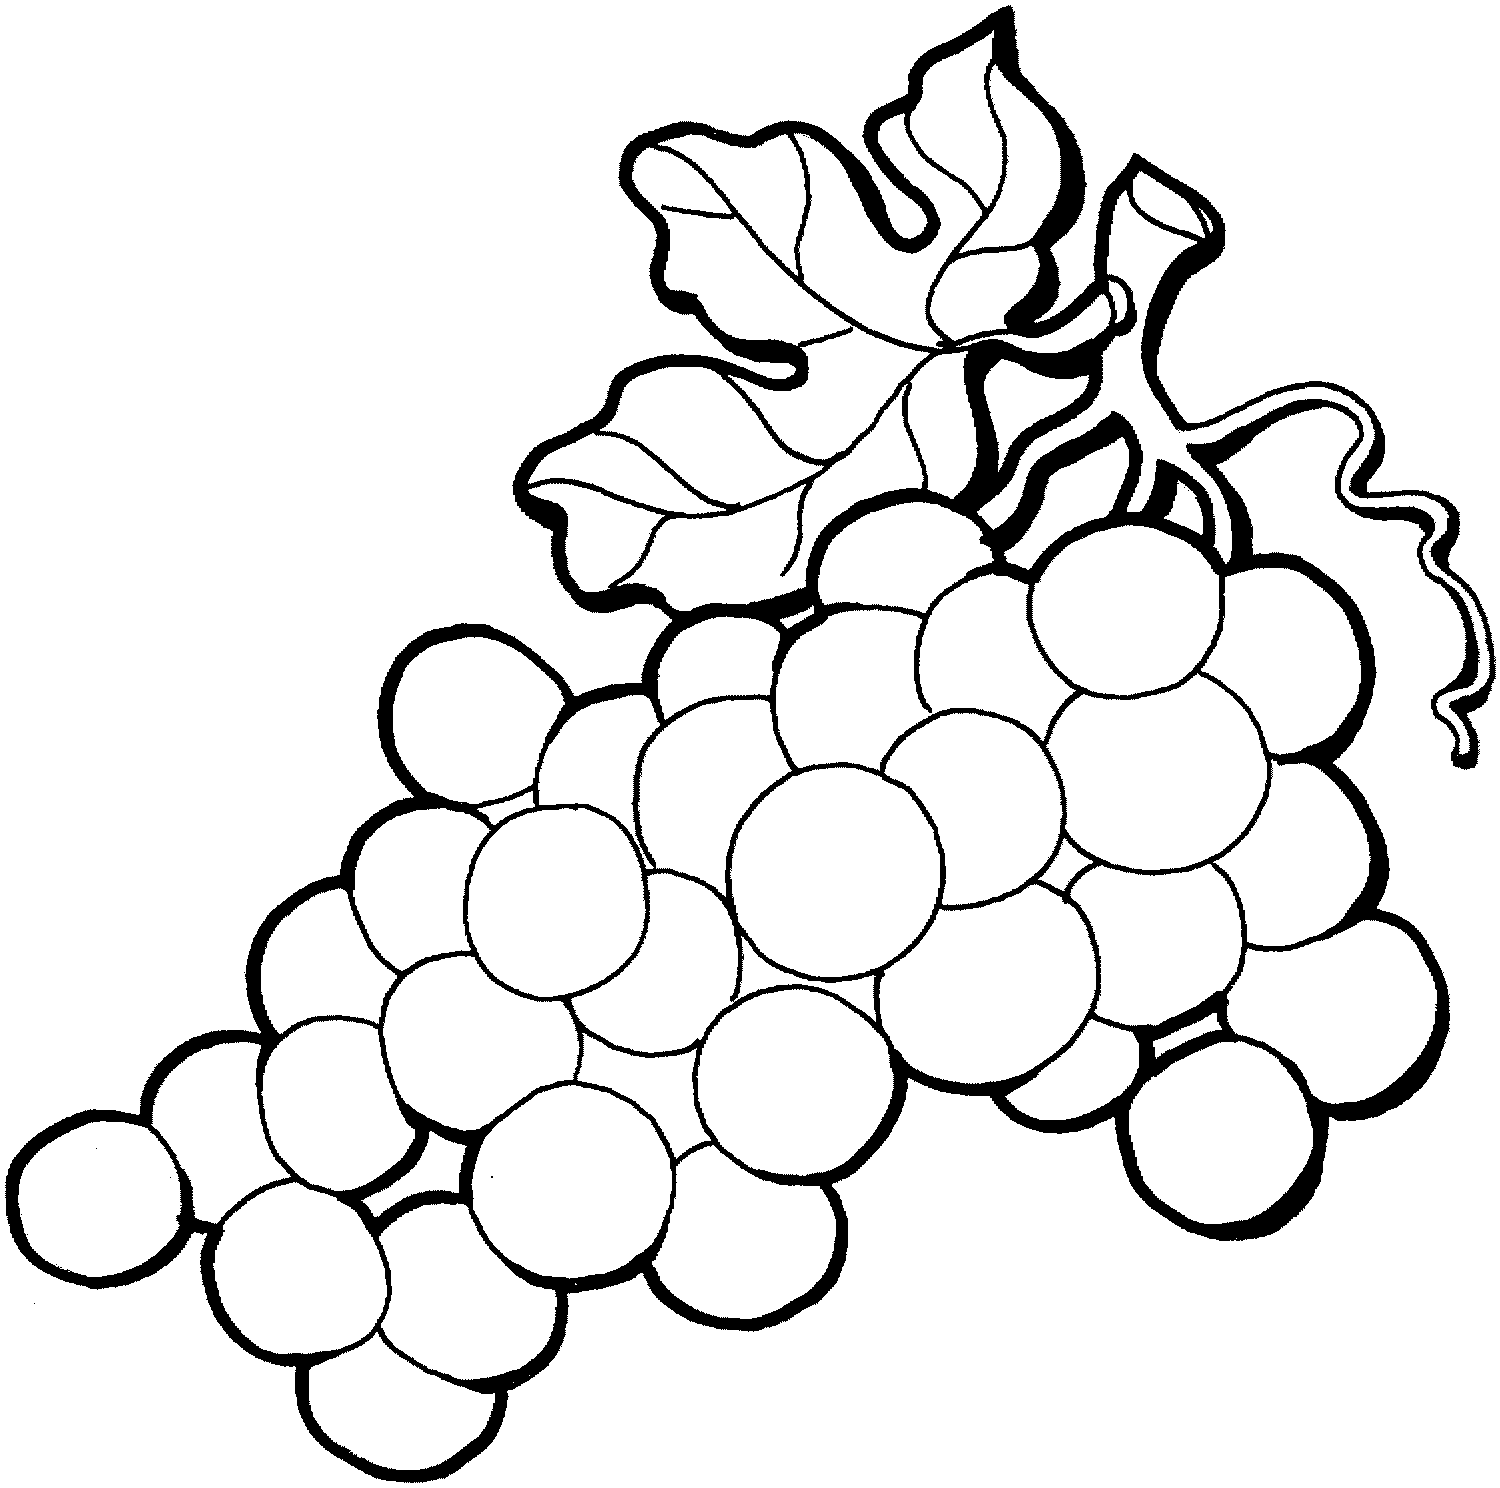 Free Black And White Grapes, Download Free Clip Art, Free.